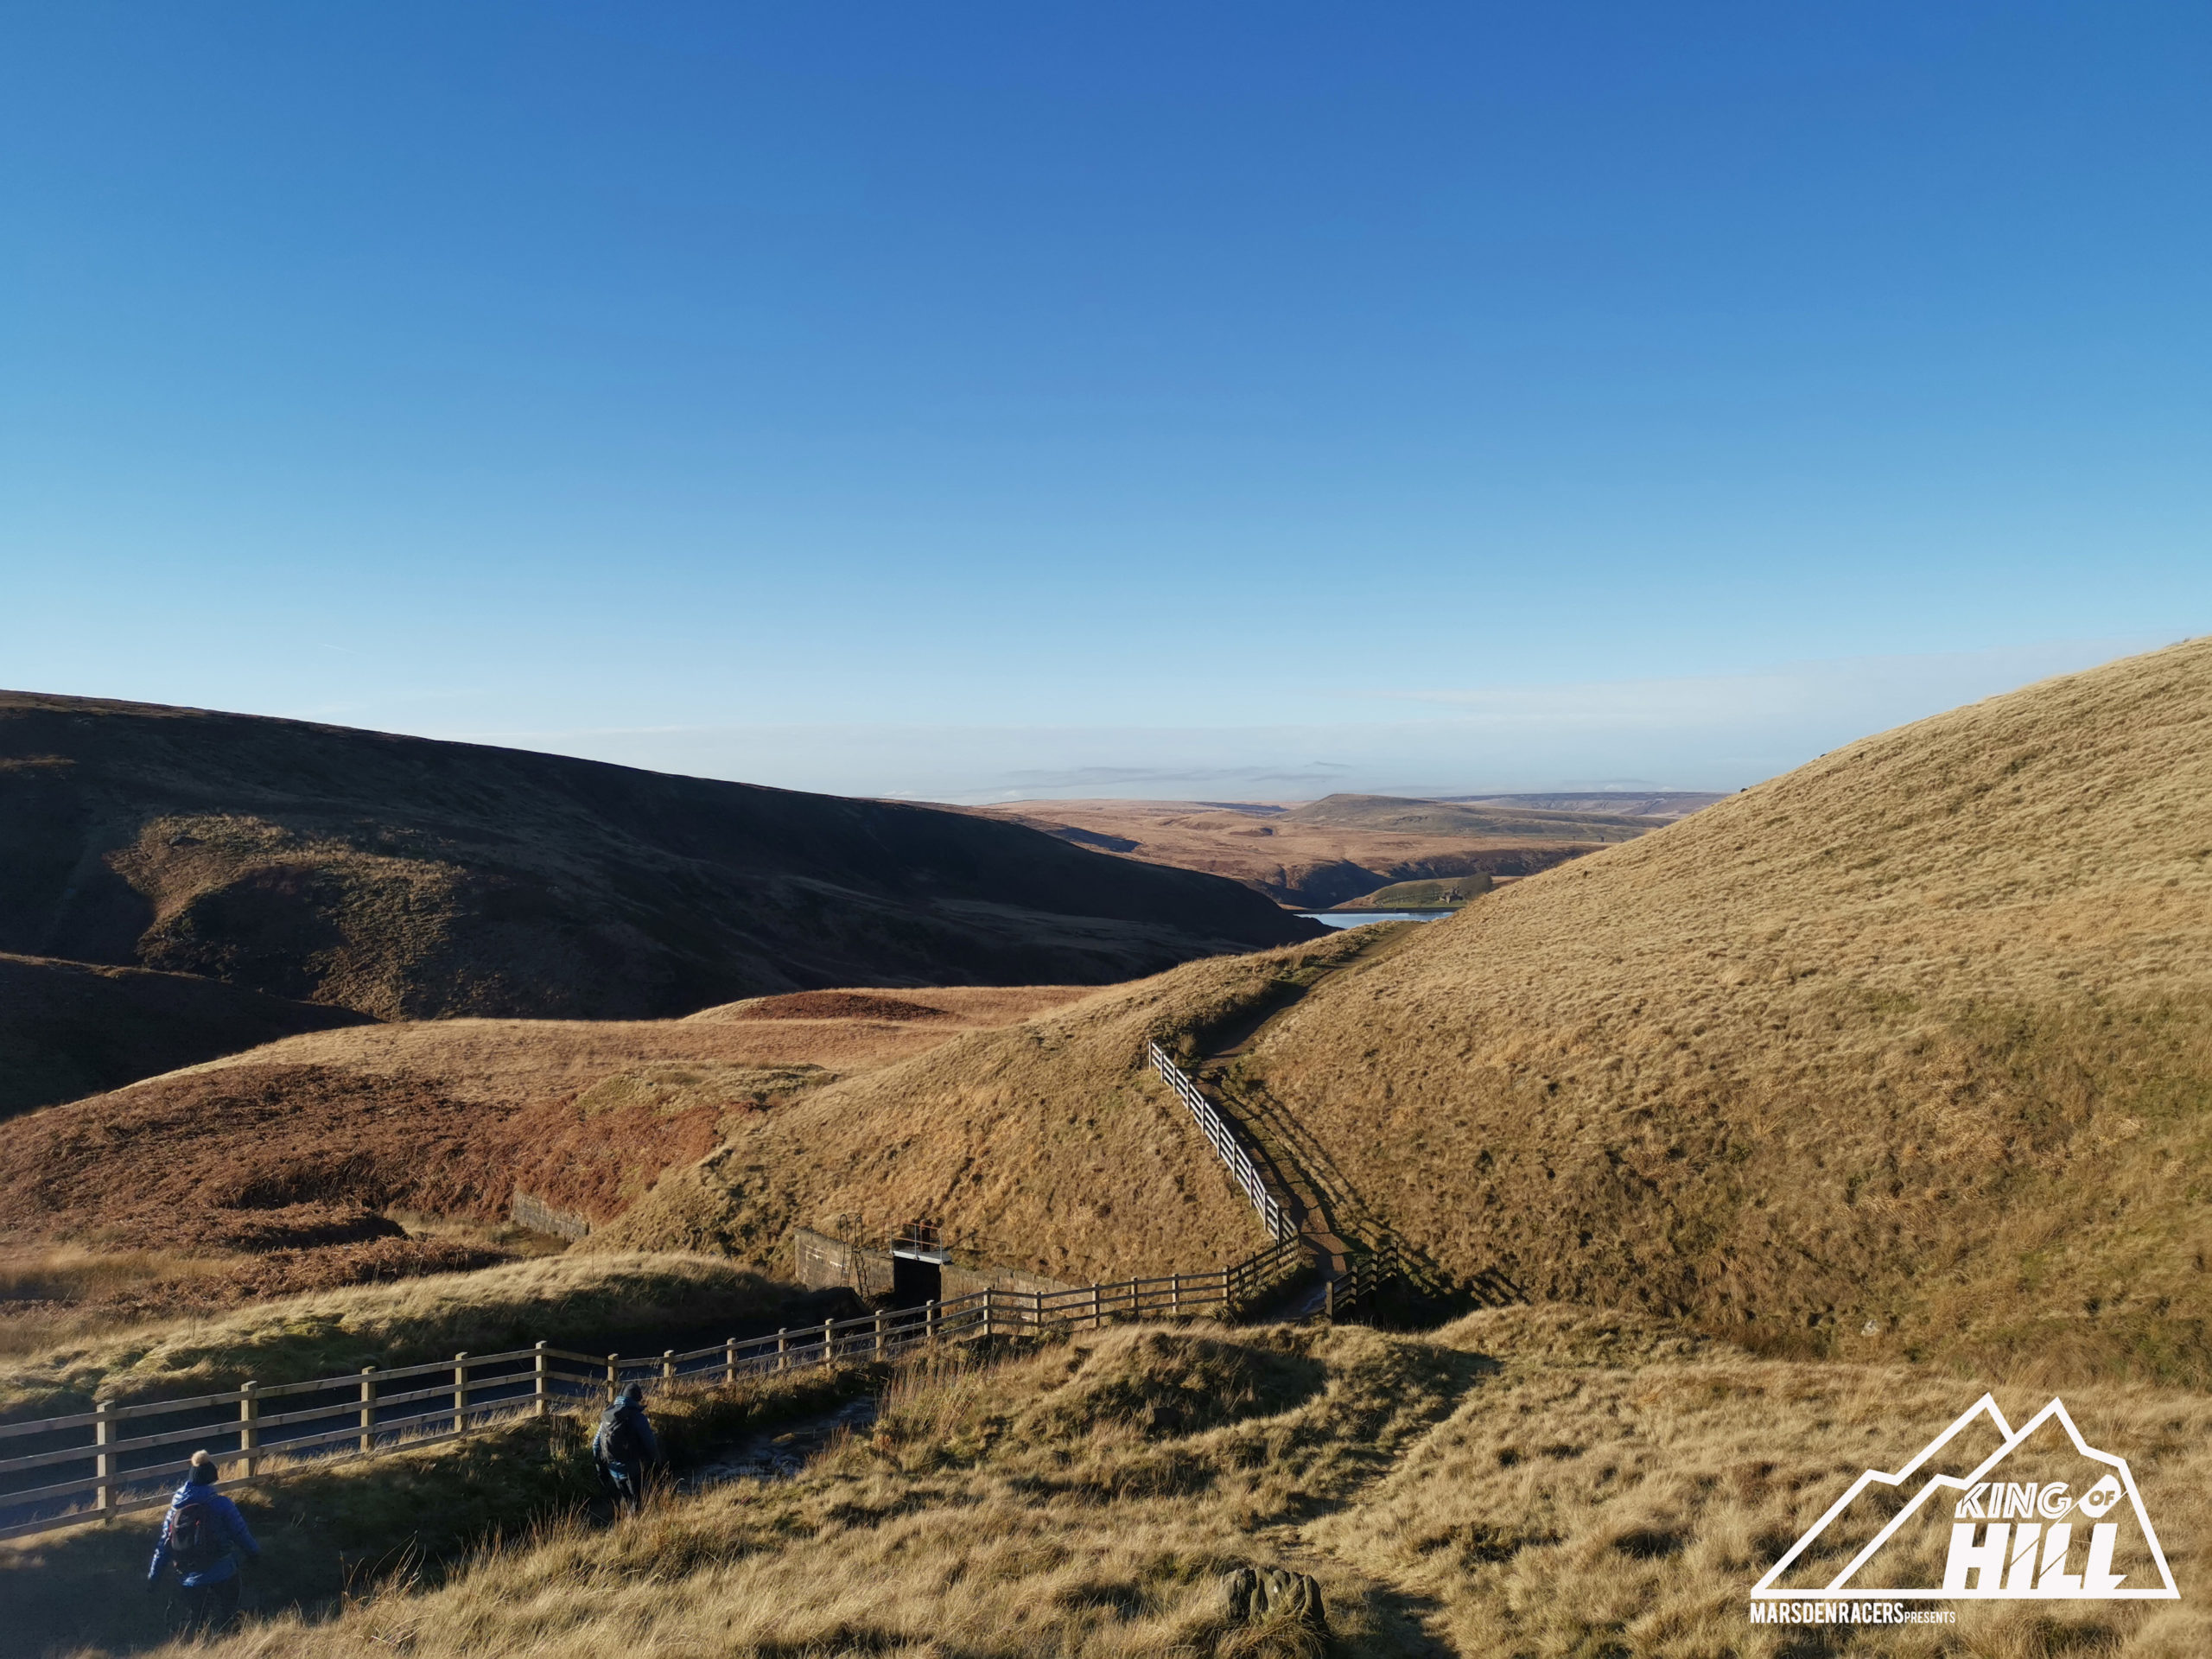 King of the Hill Course Route in Marsden